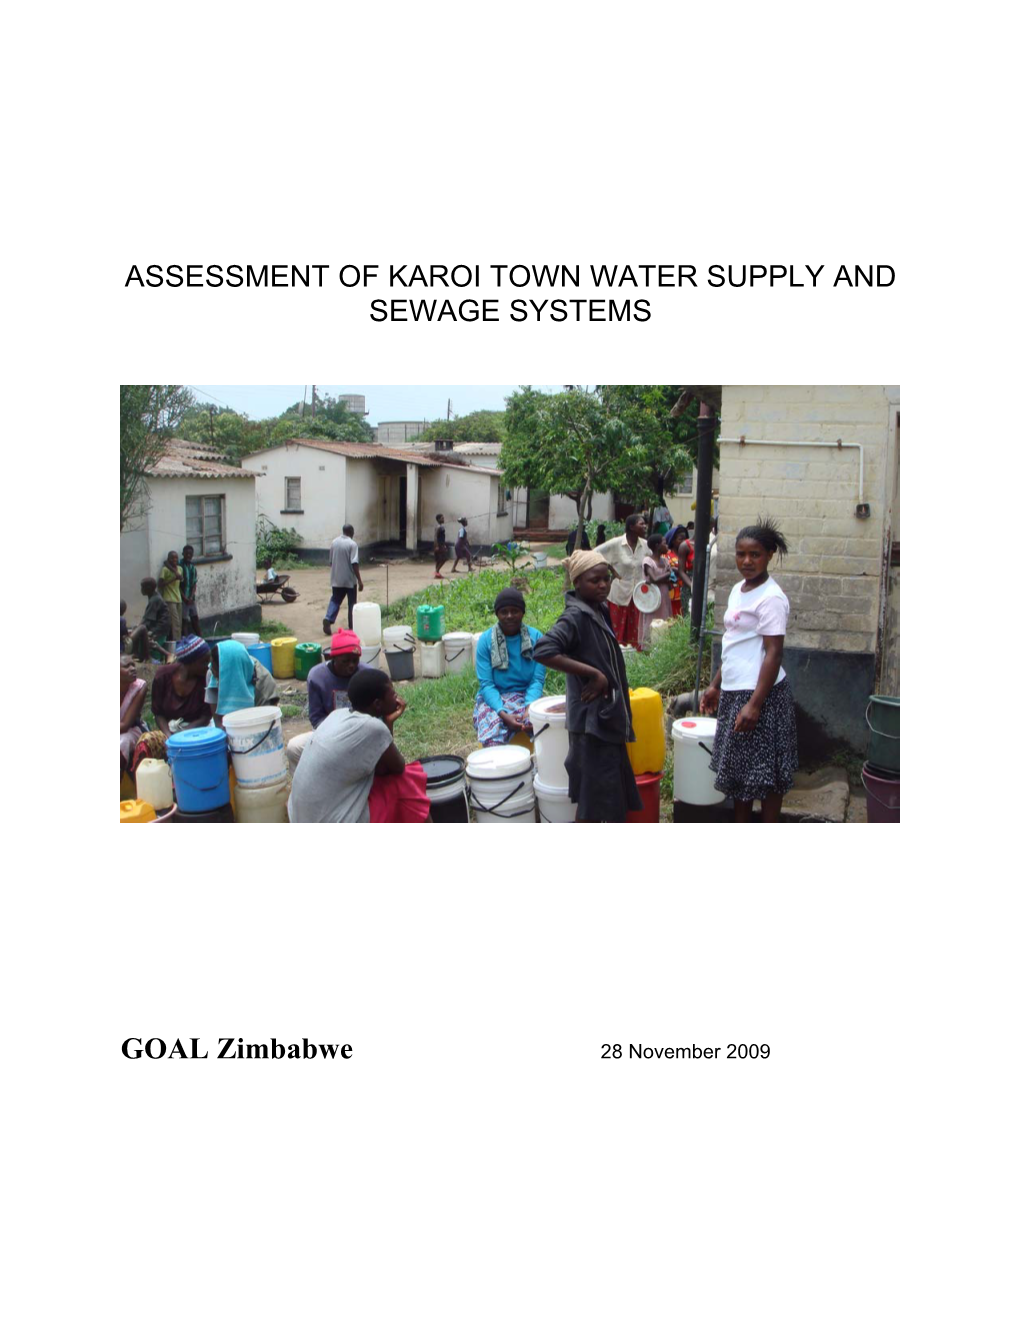 Assessment of Karoi Town Water Supply and Sewage Systems